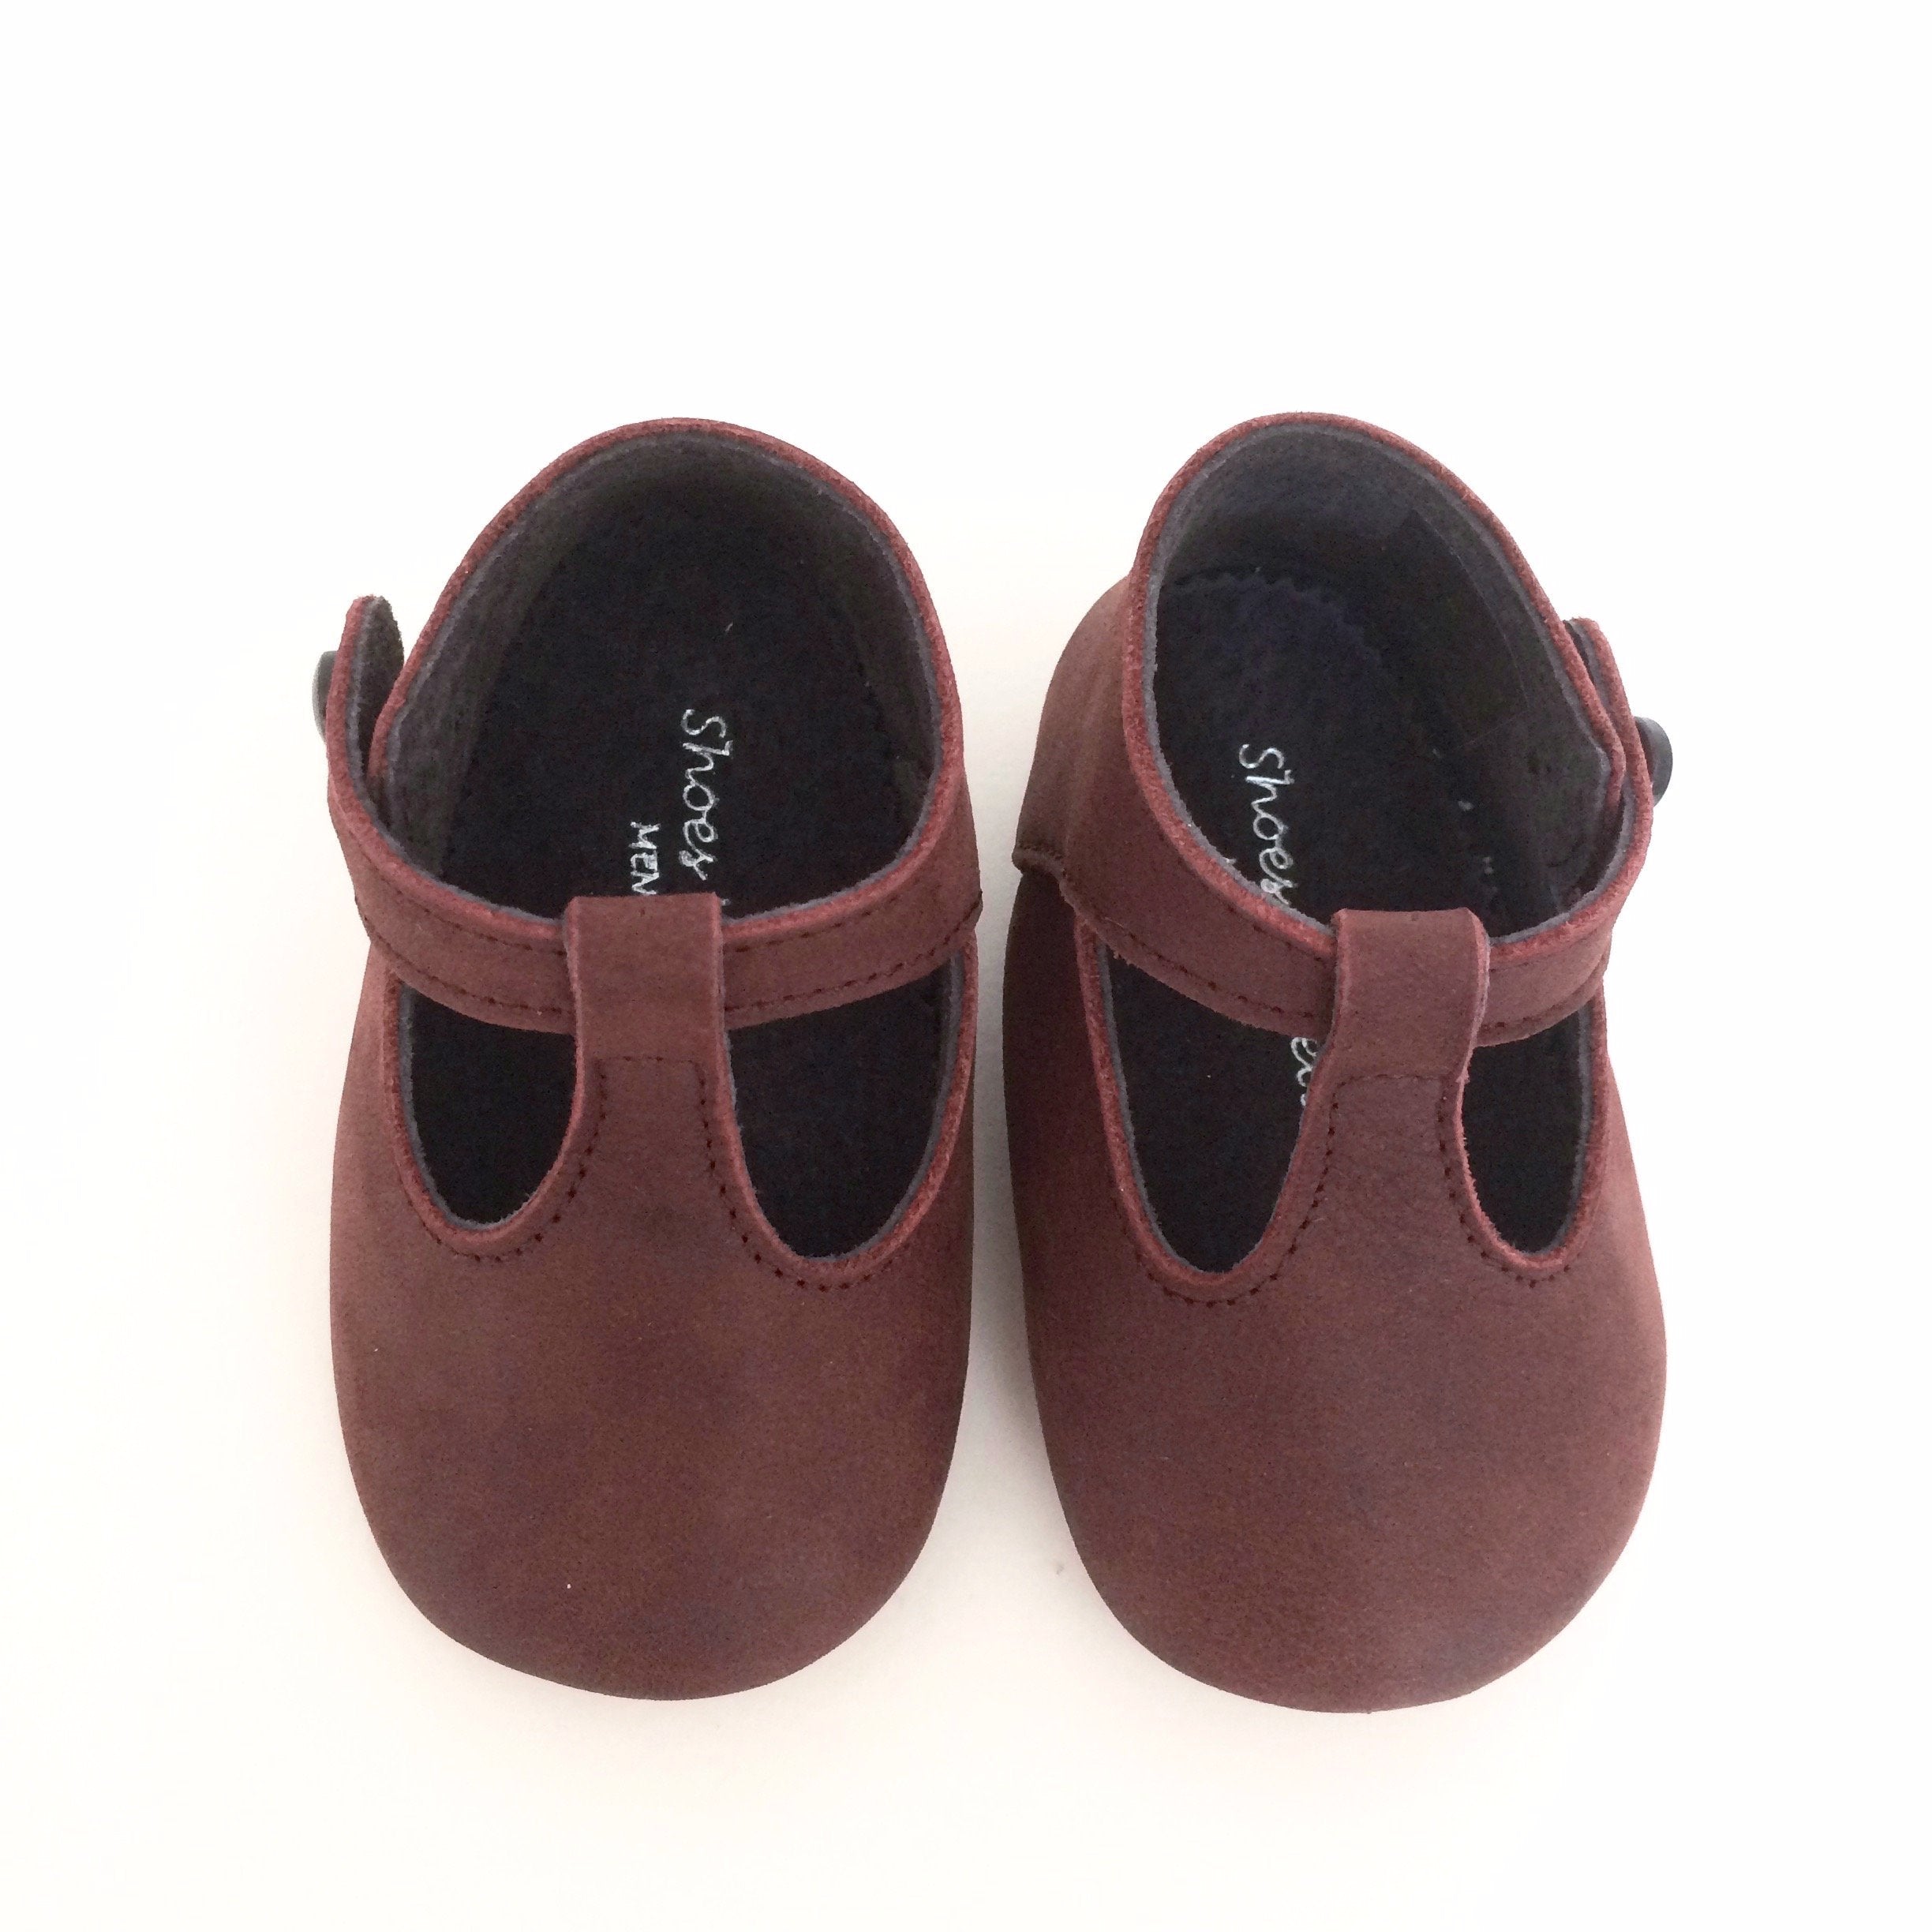 Luxury Baby Shoes by Shoes Le Petit